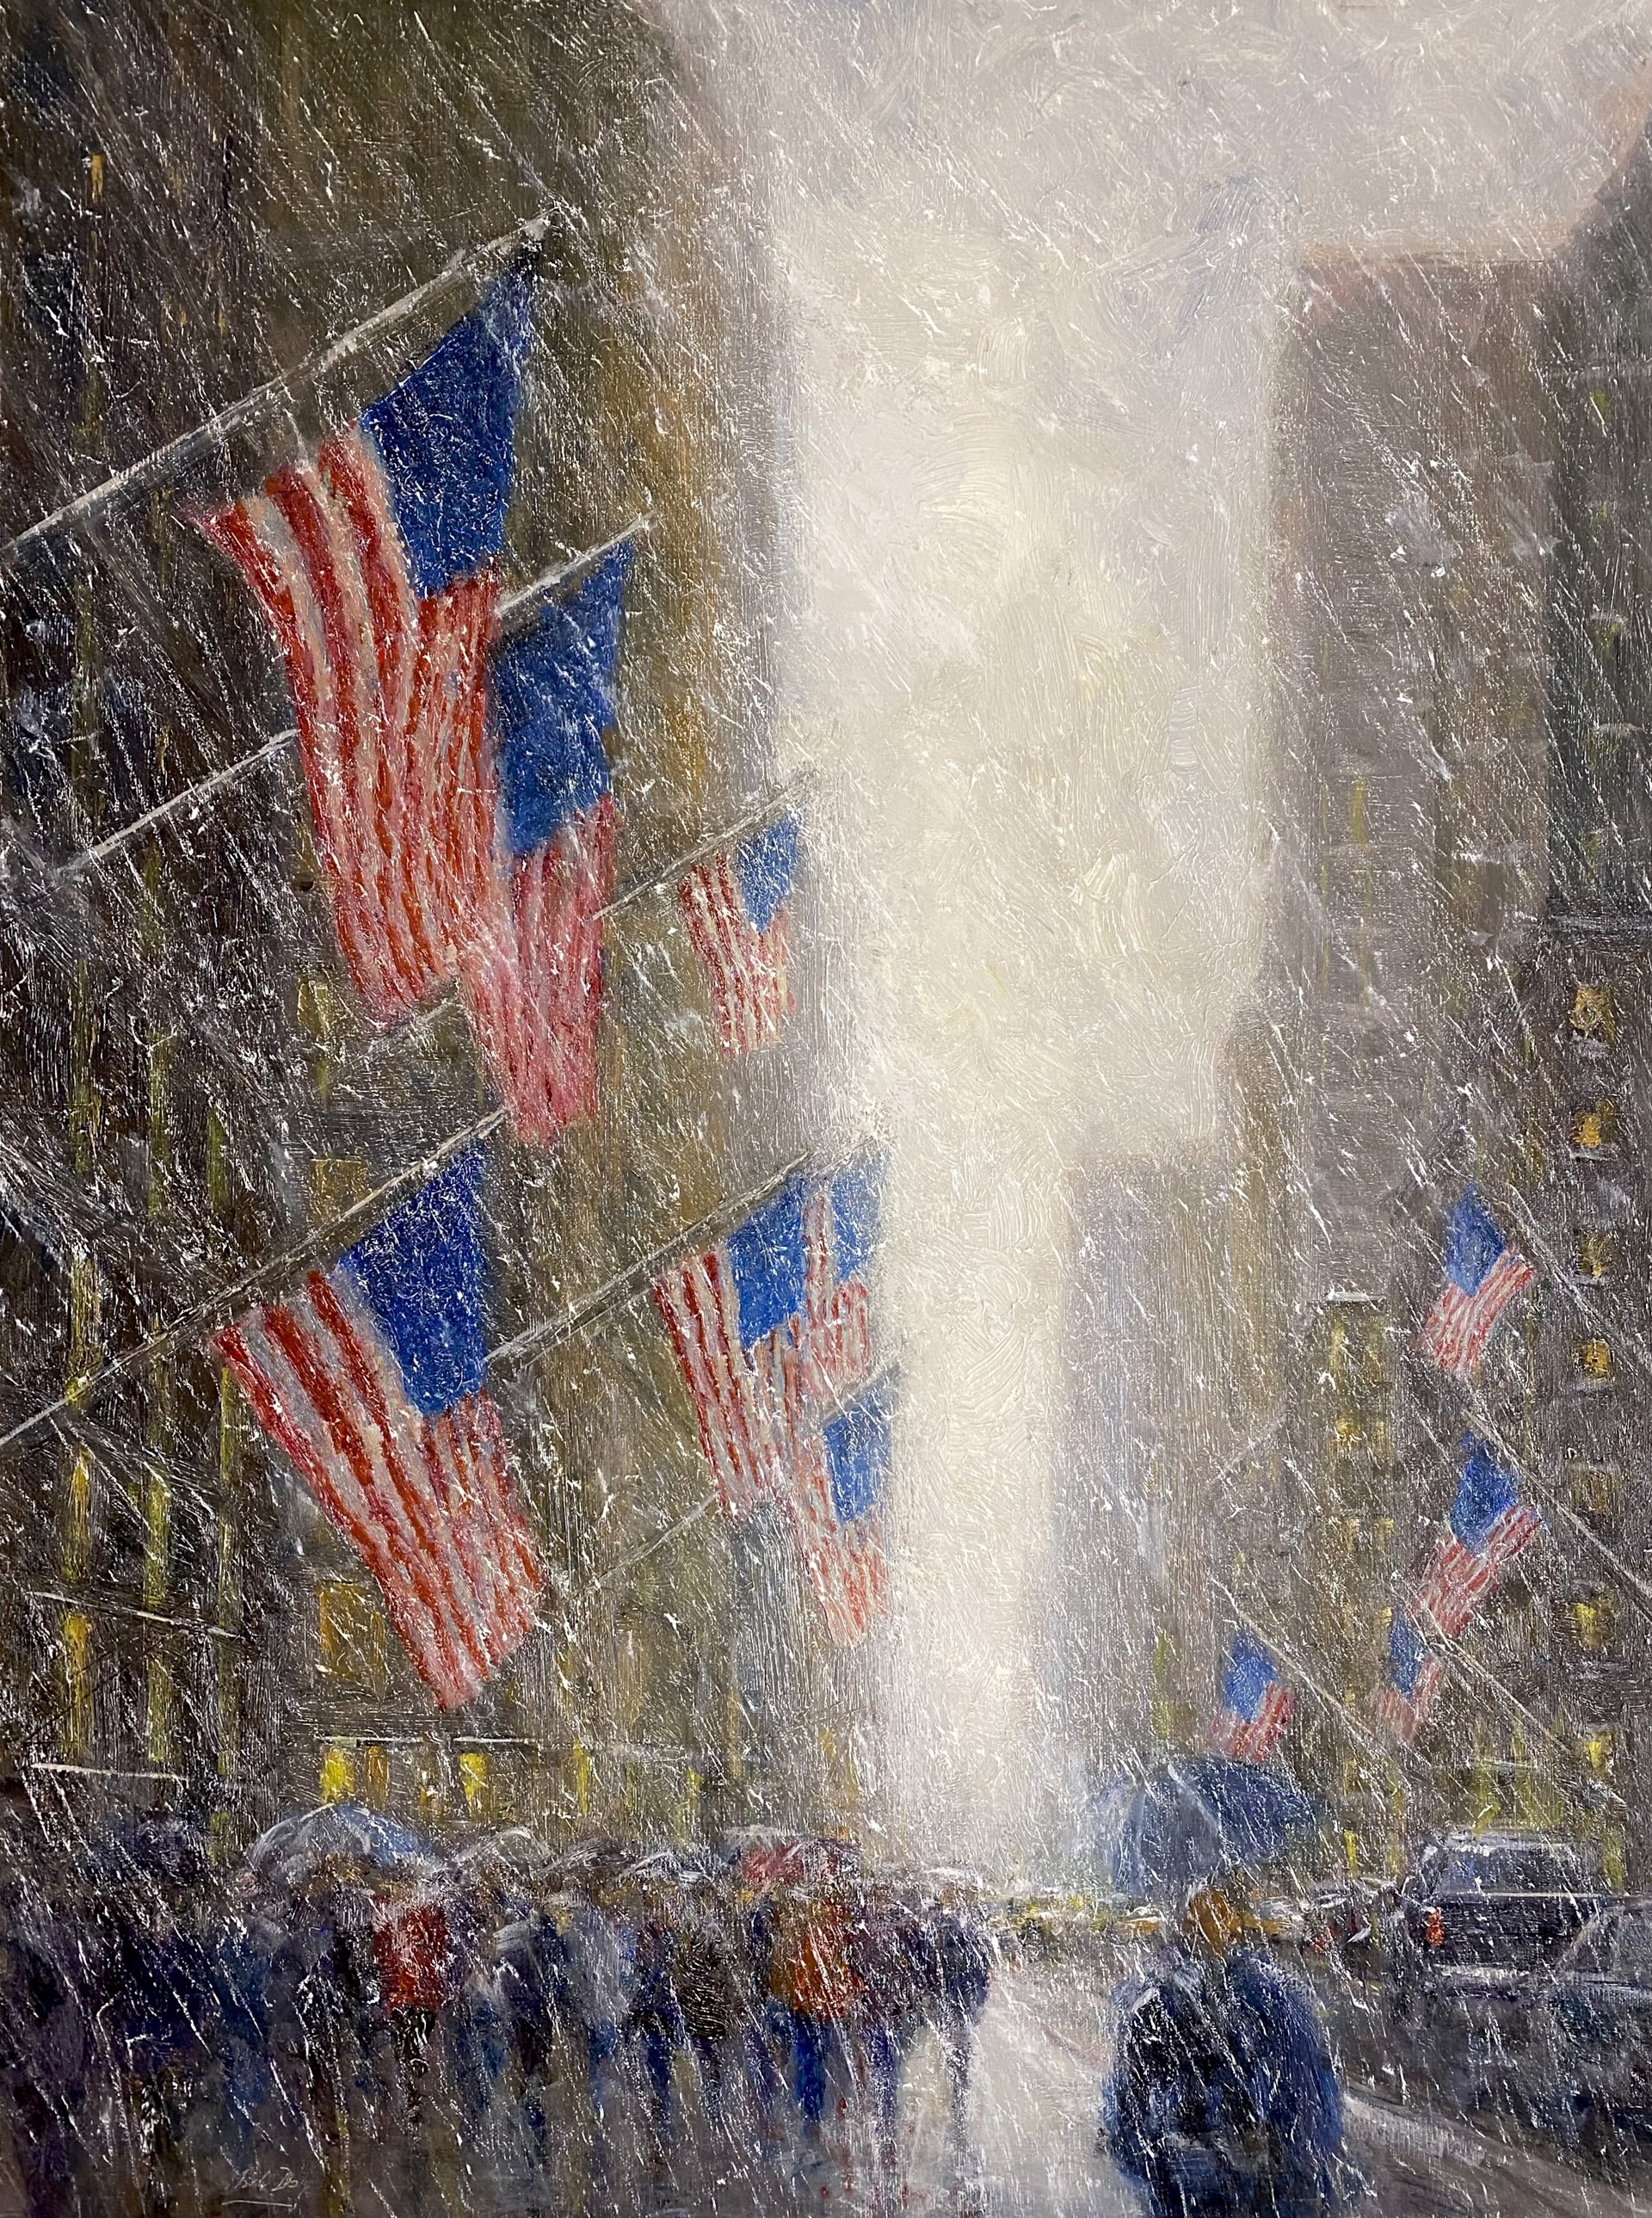 Snowy Day, Rockefeller Center by Mark Daly